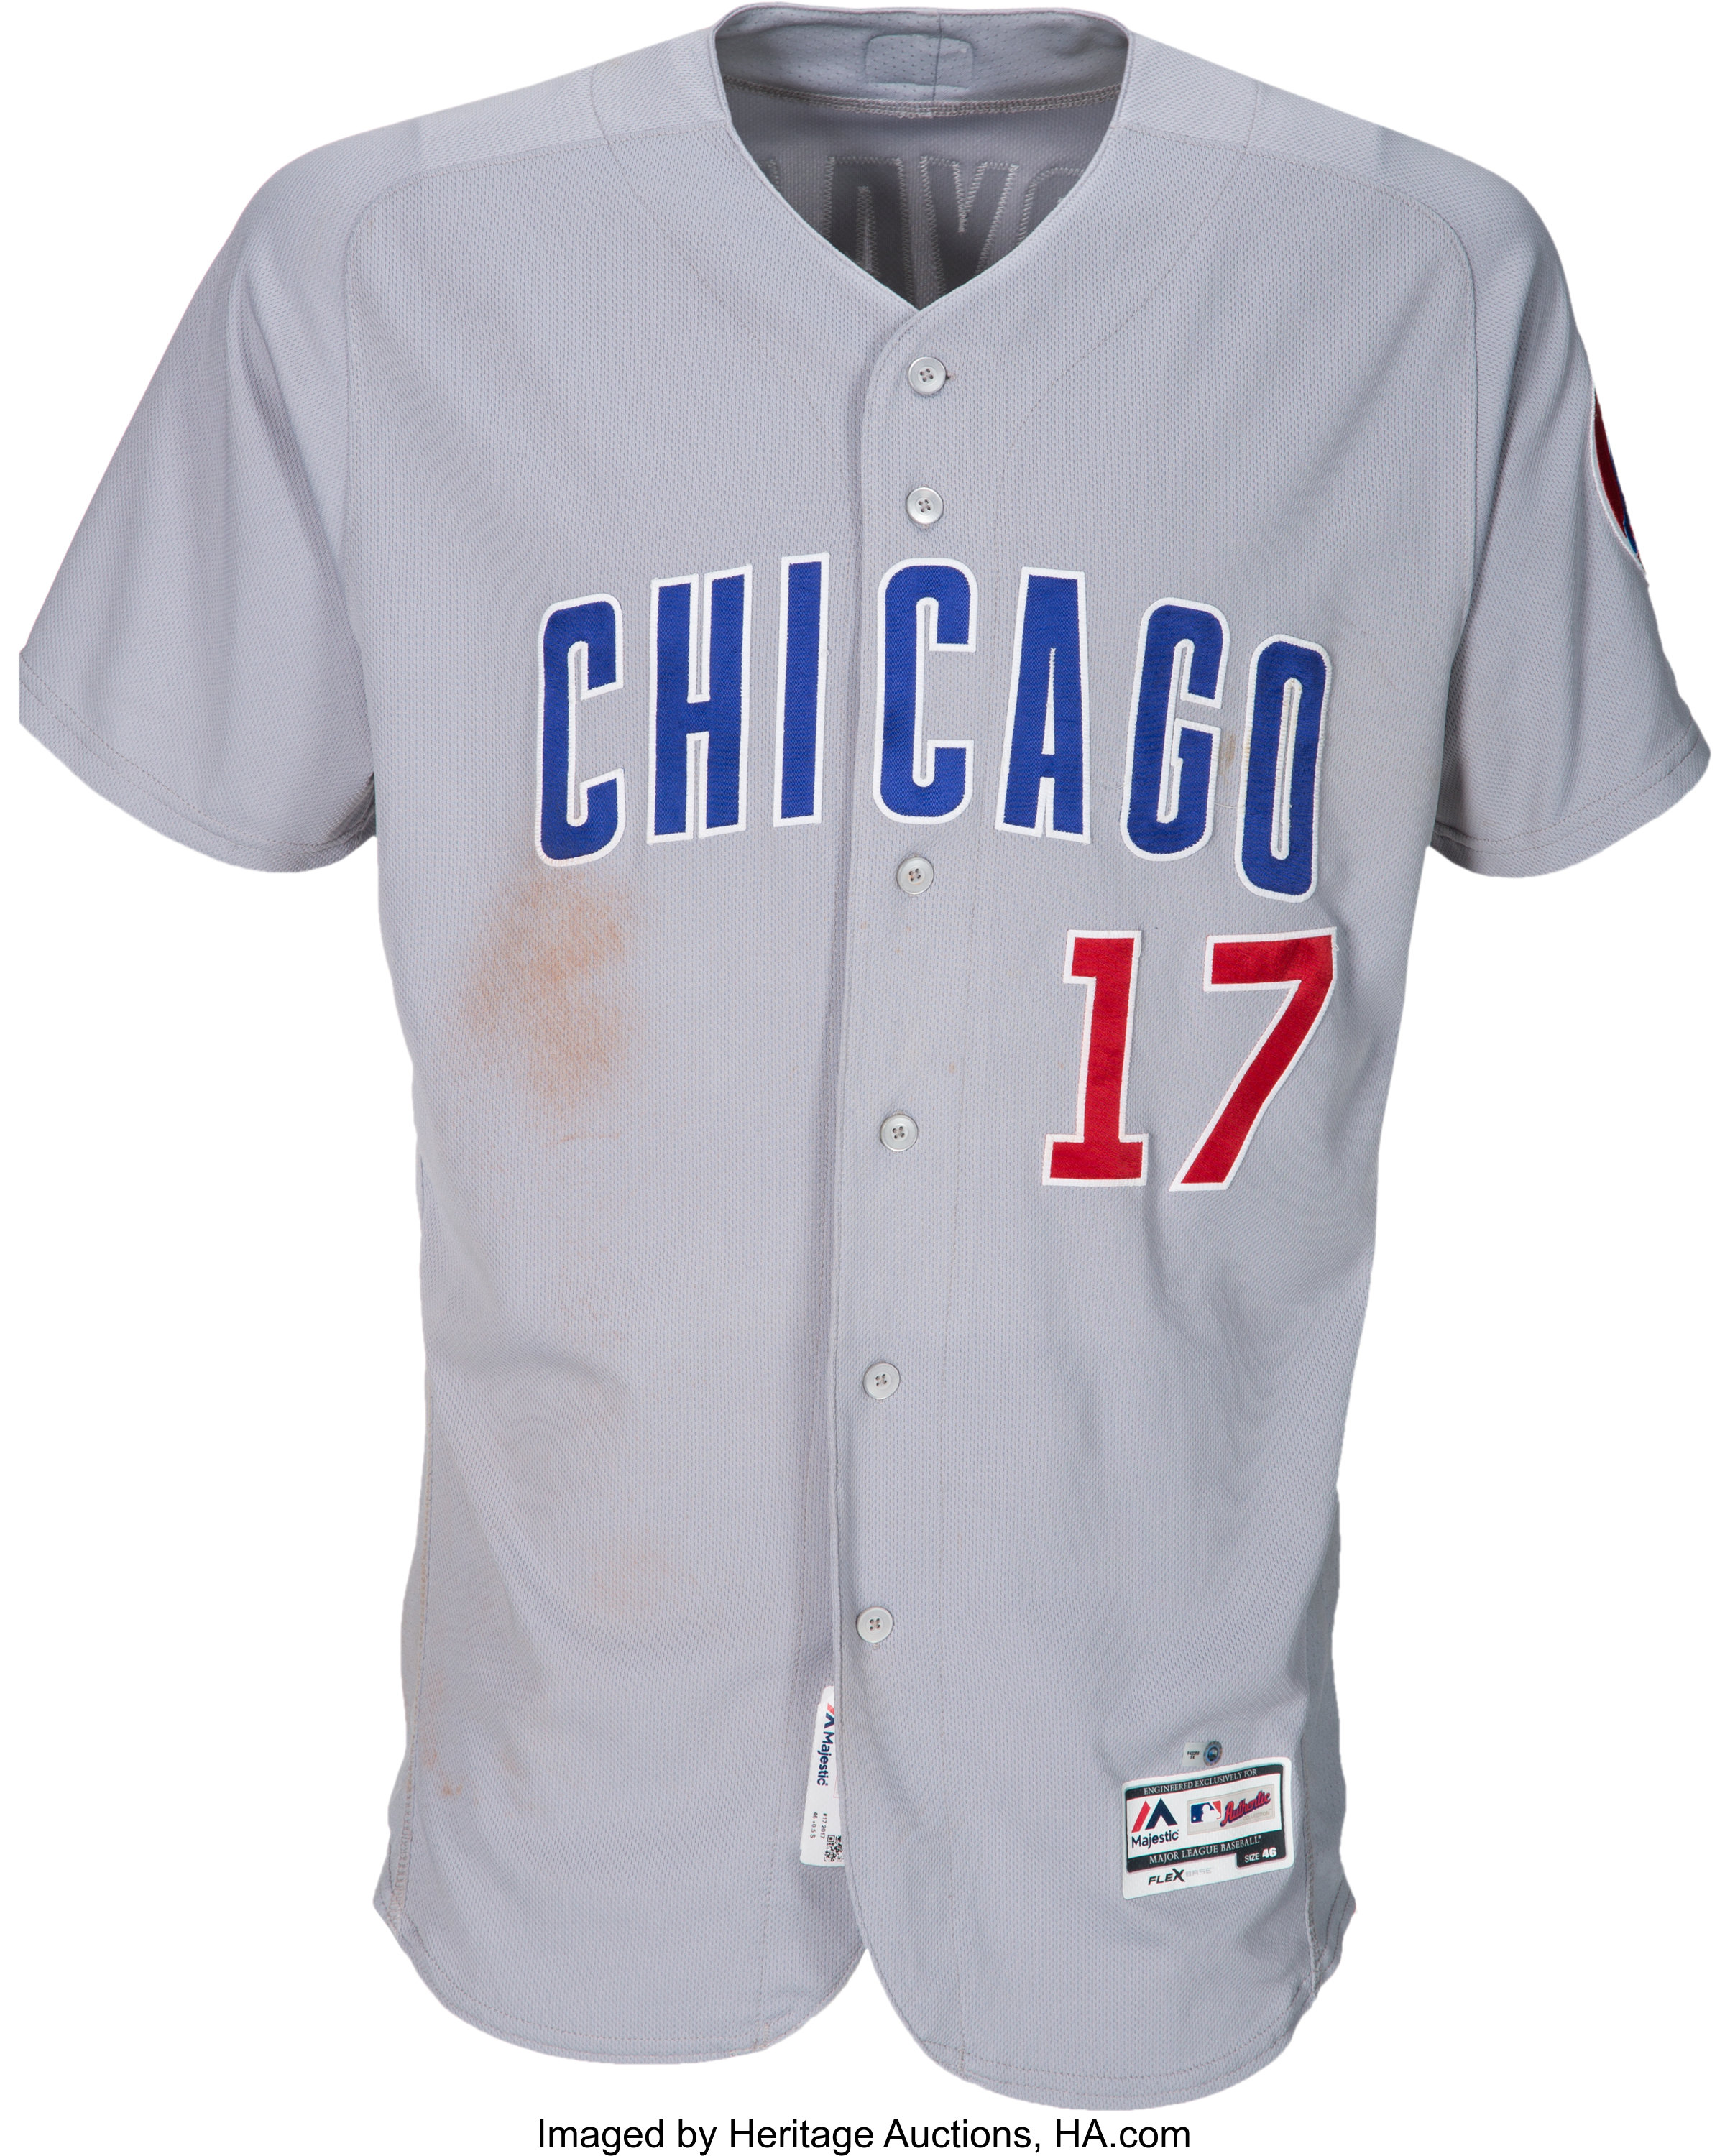 2017 Kris Bryant Game Worn Chicago Cubs Jersey with Multiple Photo